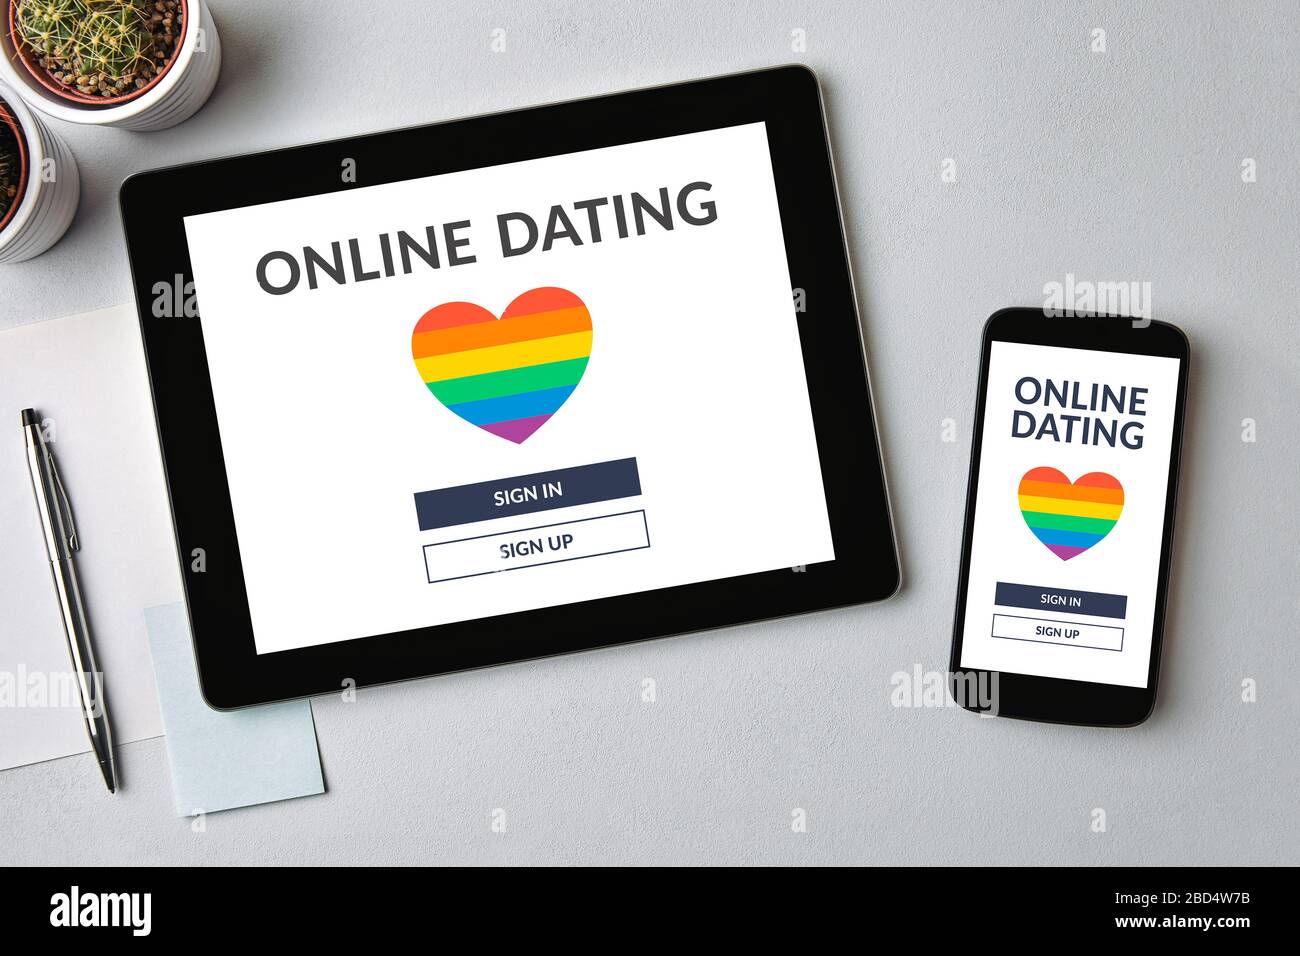 LGBT dating app concept on tablet and mobile phone screen over gray table. Gay online dating. Top view Stock Photo